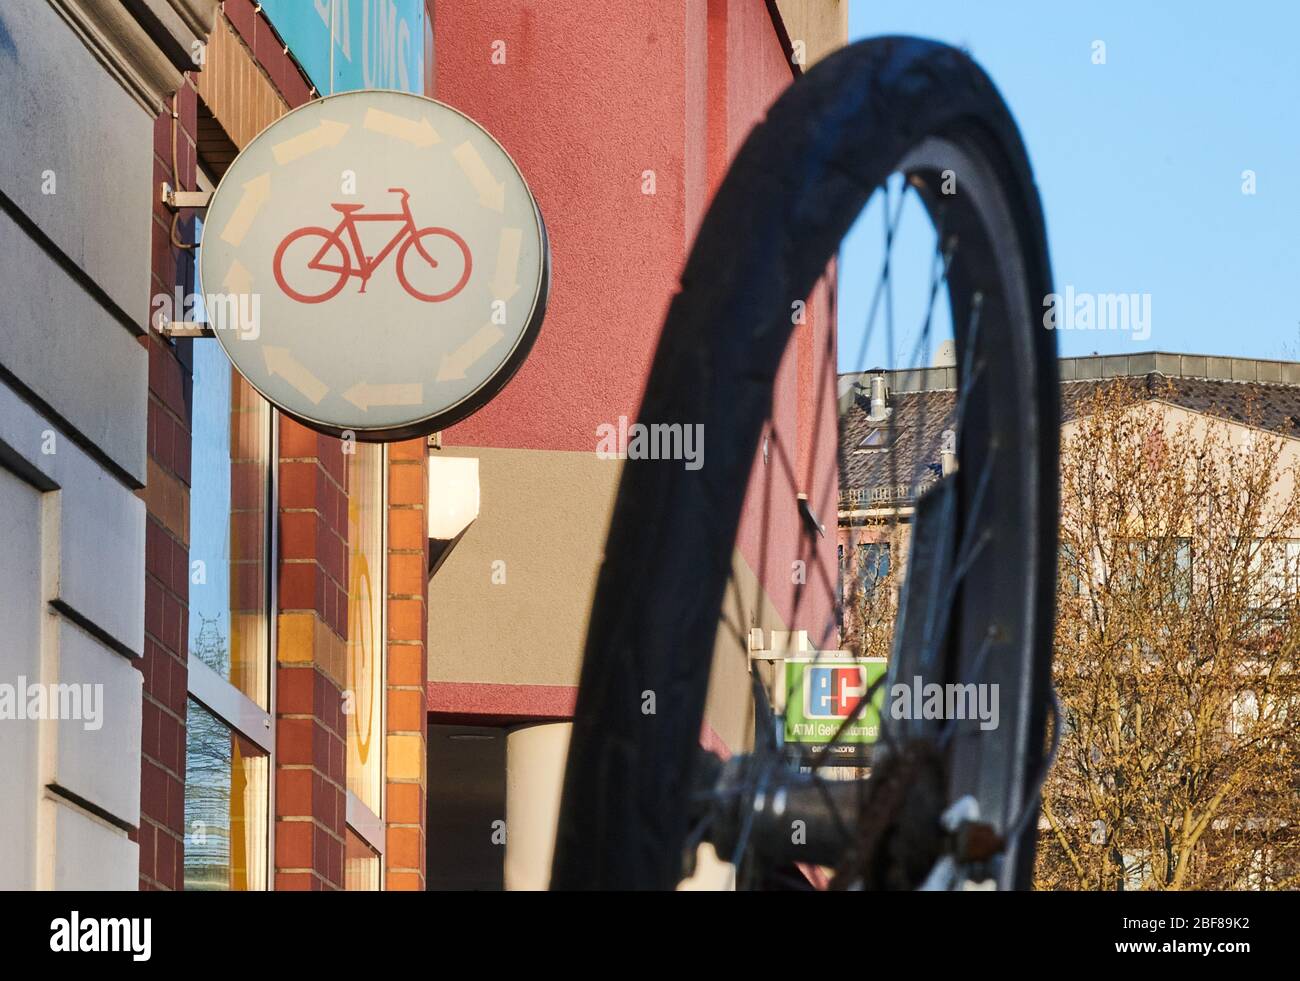 Berlin, Germany. 16th Apr, 2020. A bicycle was turned upside down and connected. It's in front of a bicycle shop. The new regulation in the Corona crisis means that bicycle shops may open again from 20 April. Credit: Annette Riedl/dpa/Alamy Live News Stock Photo